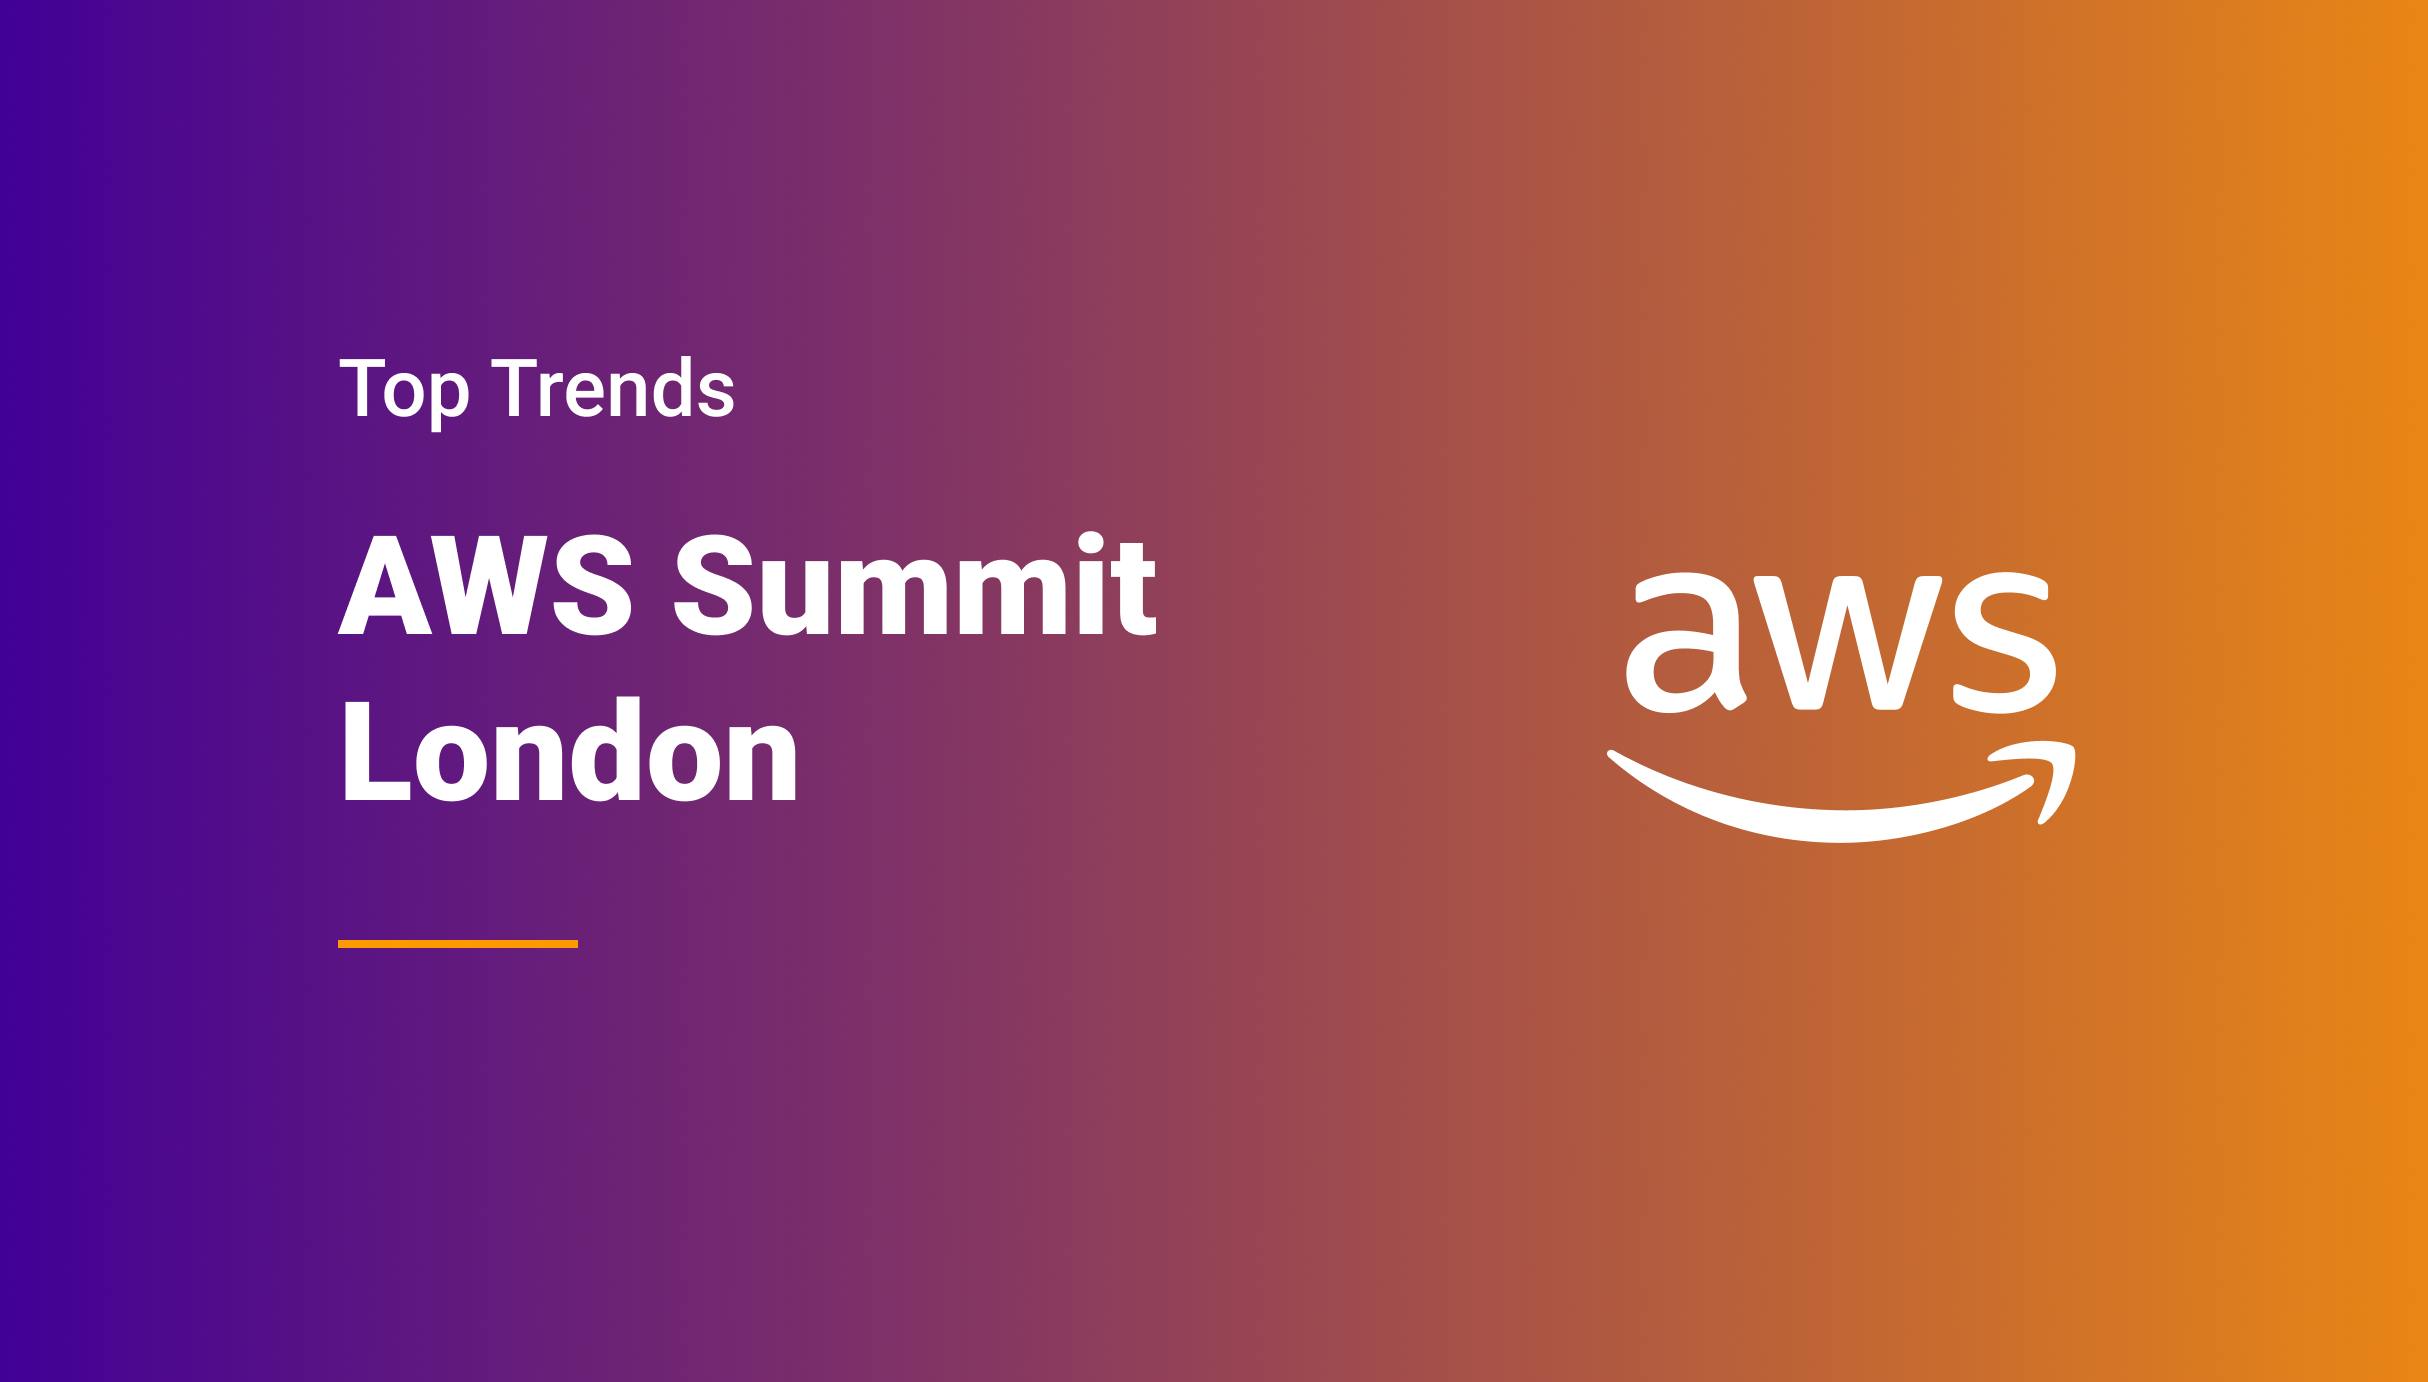 Top Trends of the AWS Summit London - Qovery